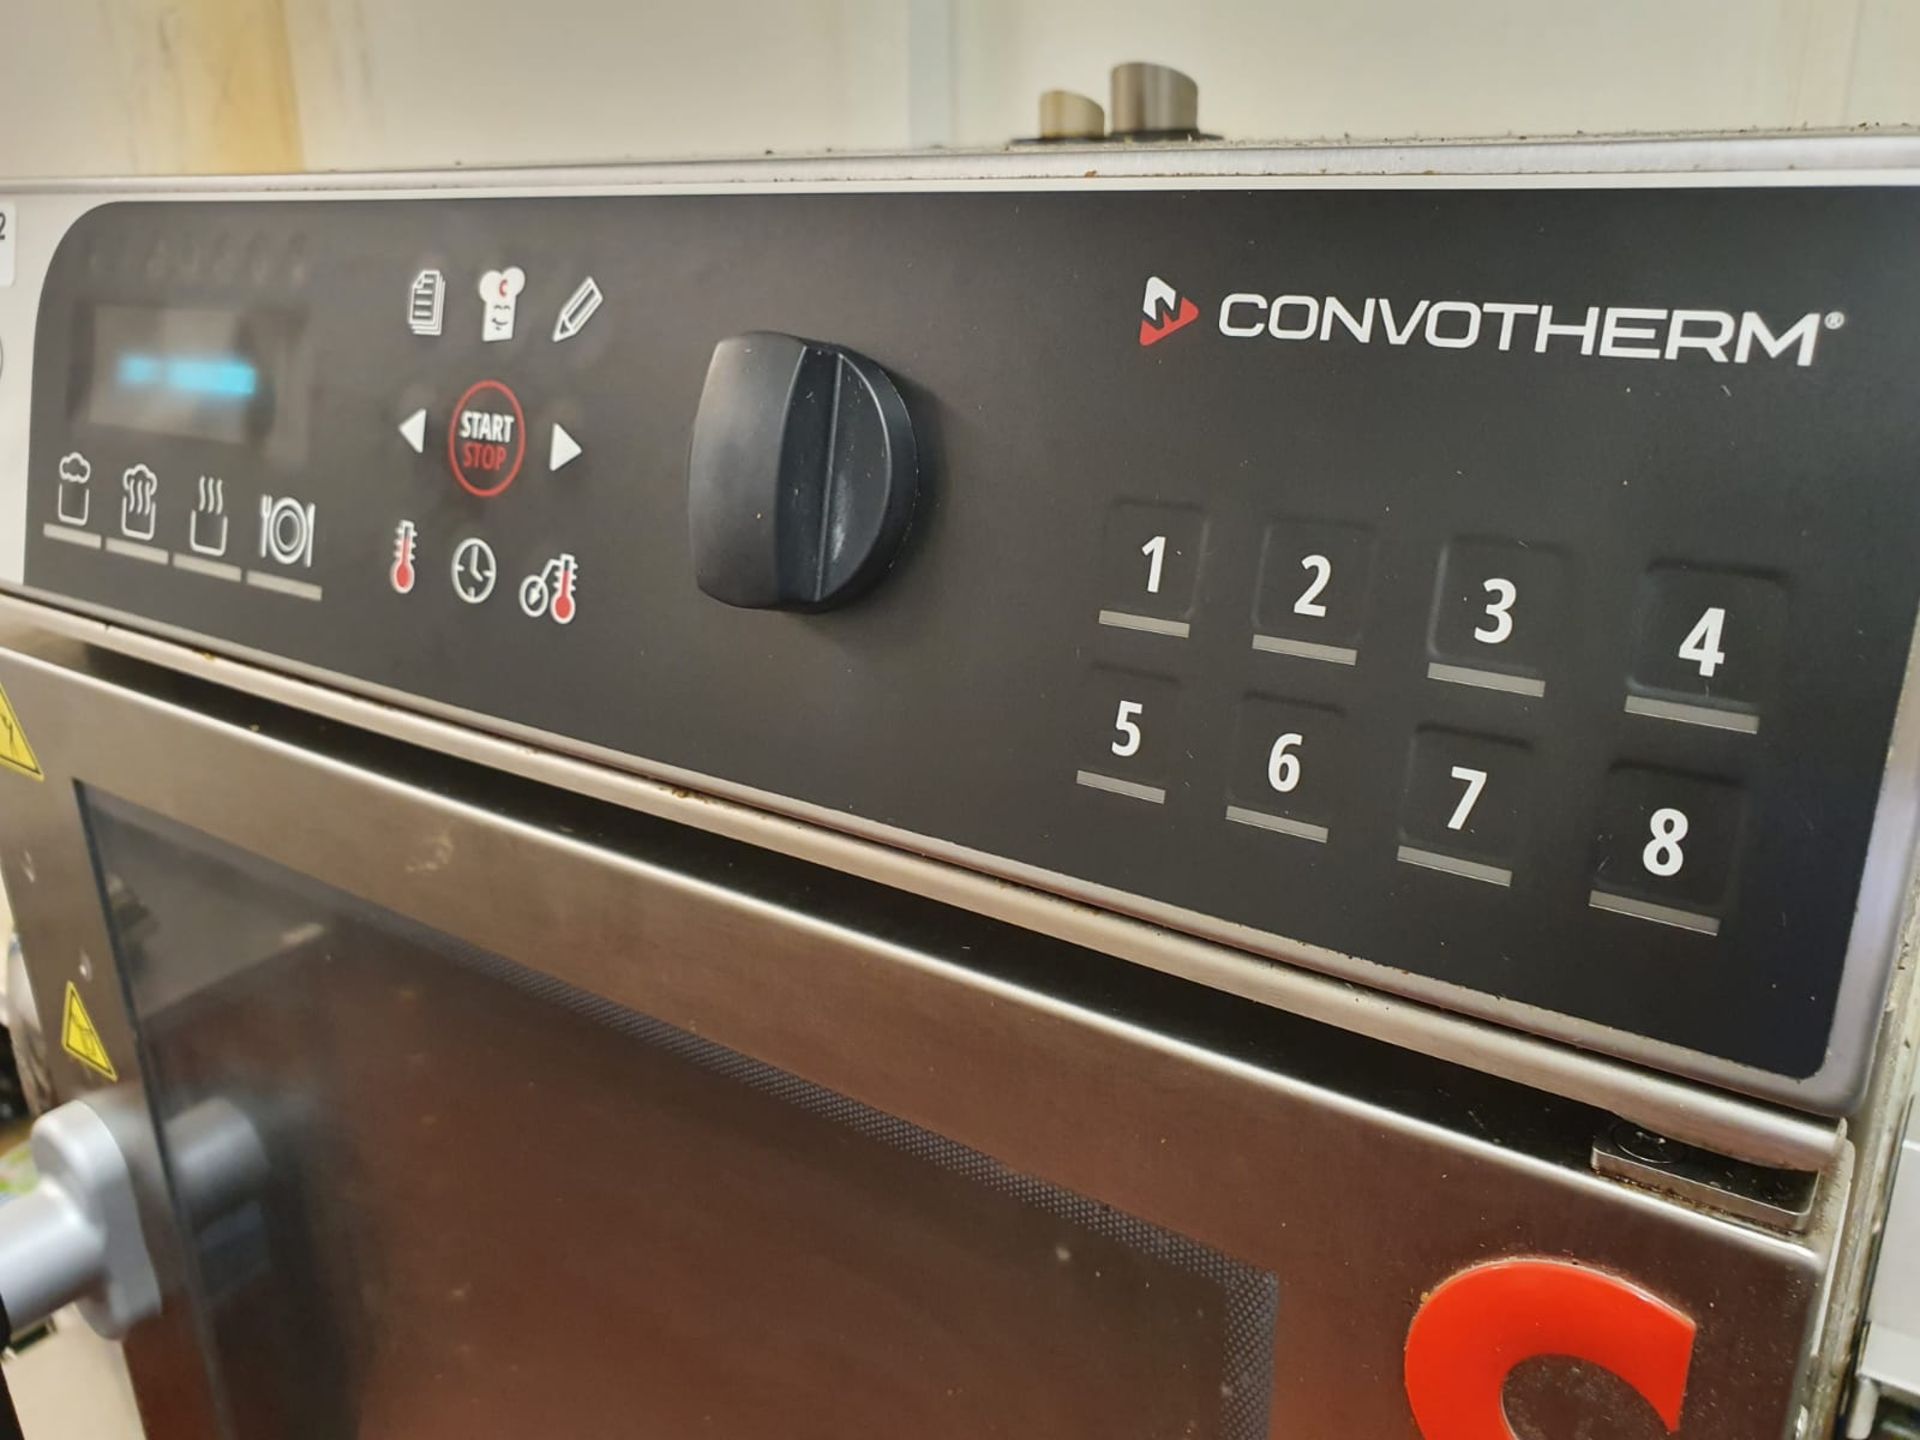 1 x Convotherm Easy Touch OES 6.06 Mini Electric Combi Steamer Oven - 3 Phase Power - RRP £4,000 - - Image 3 of 7